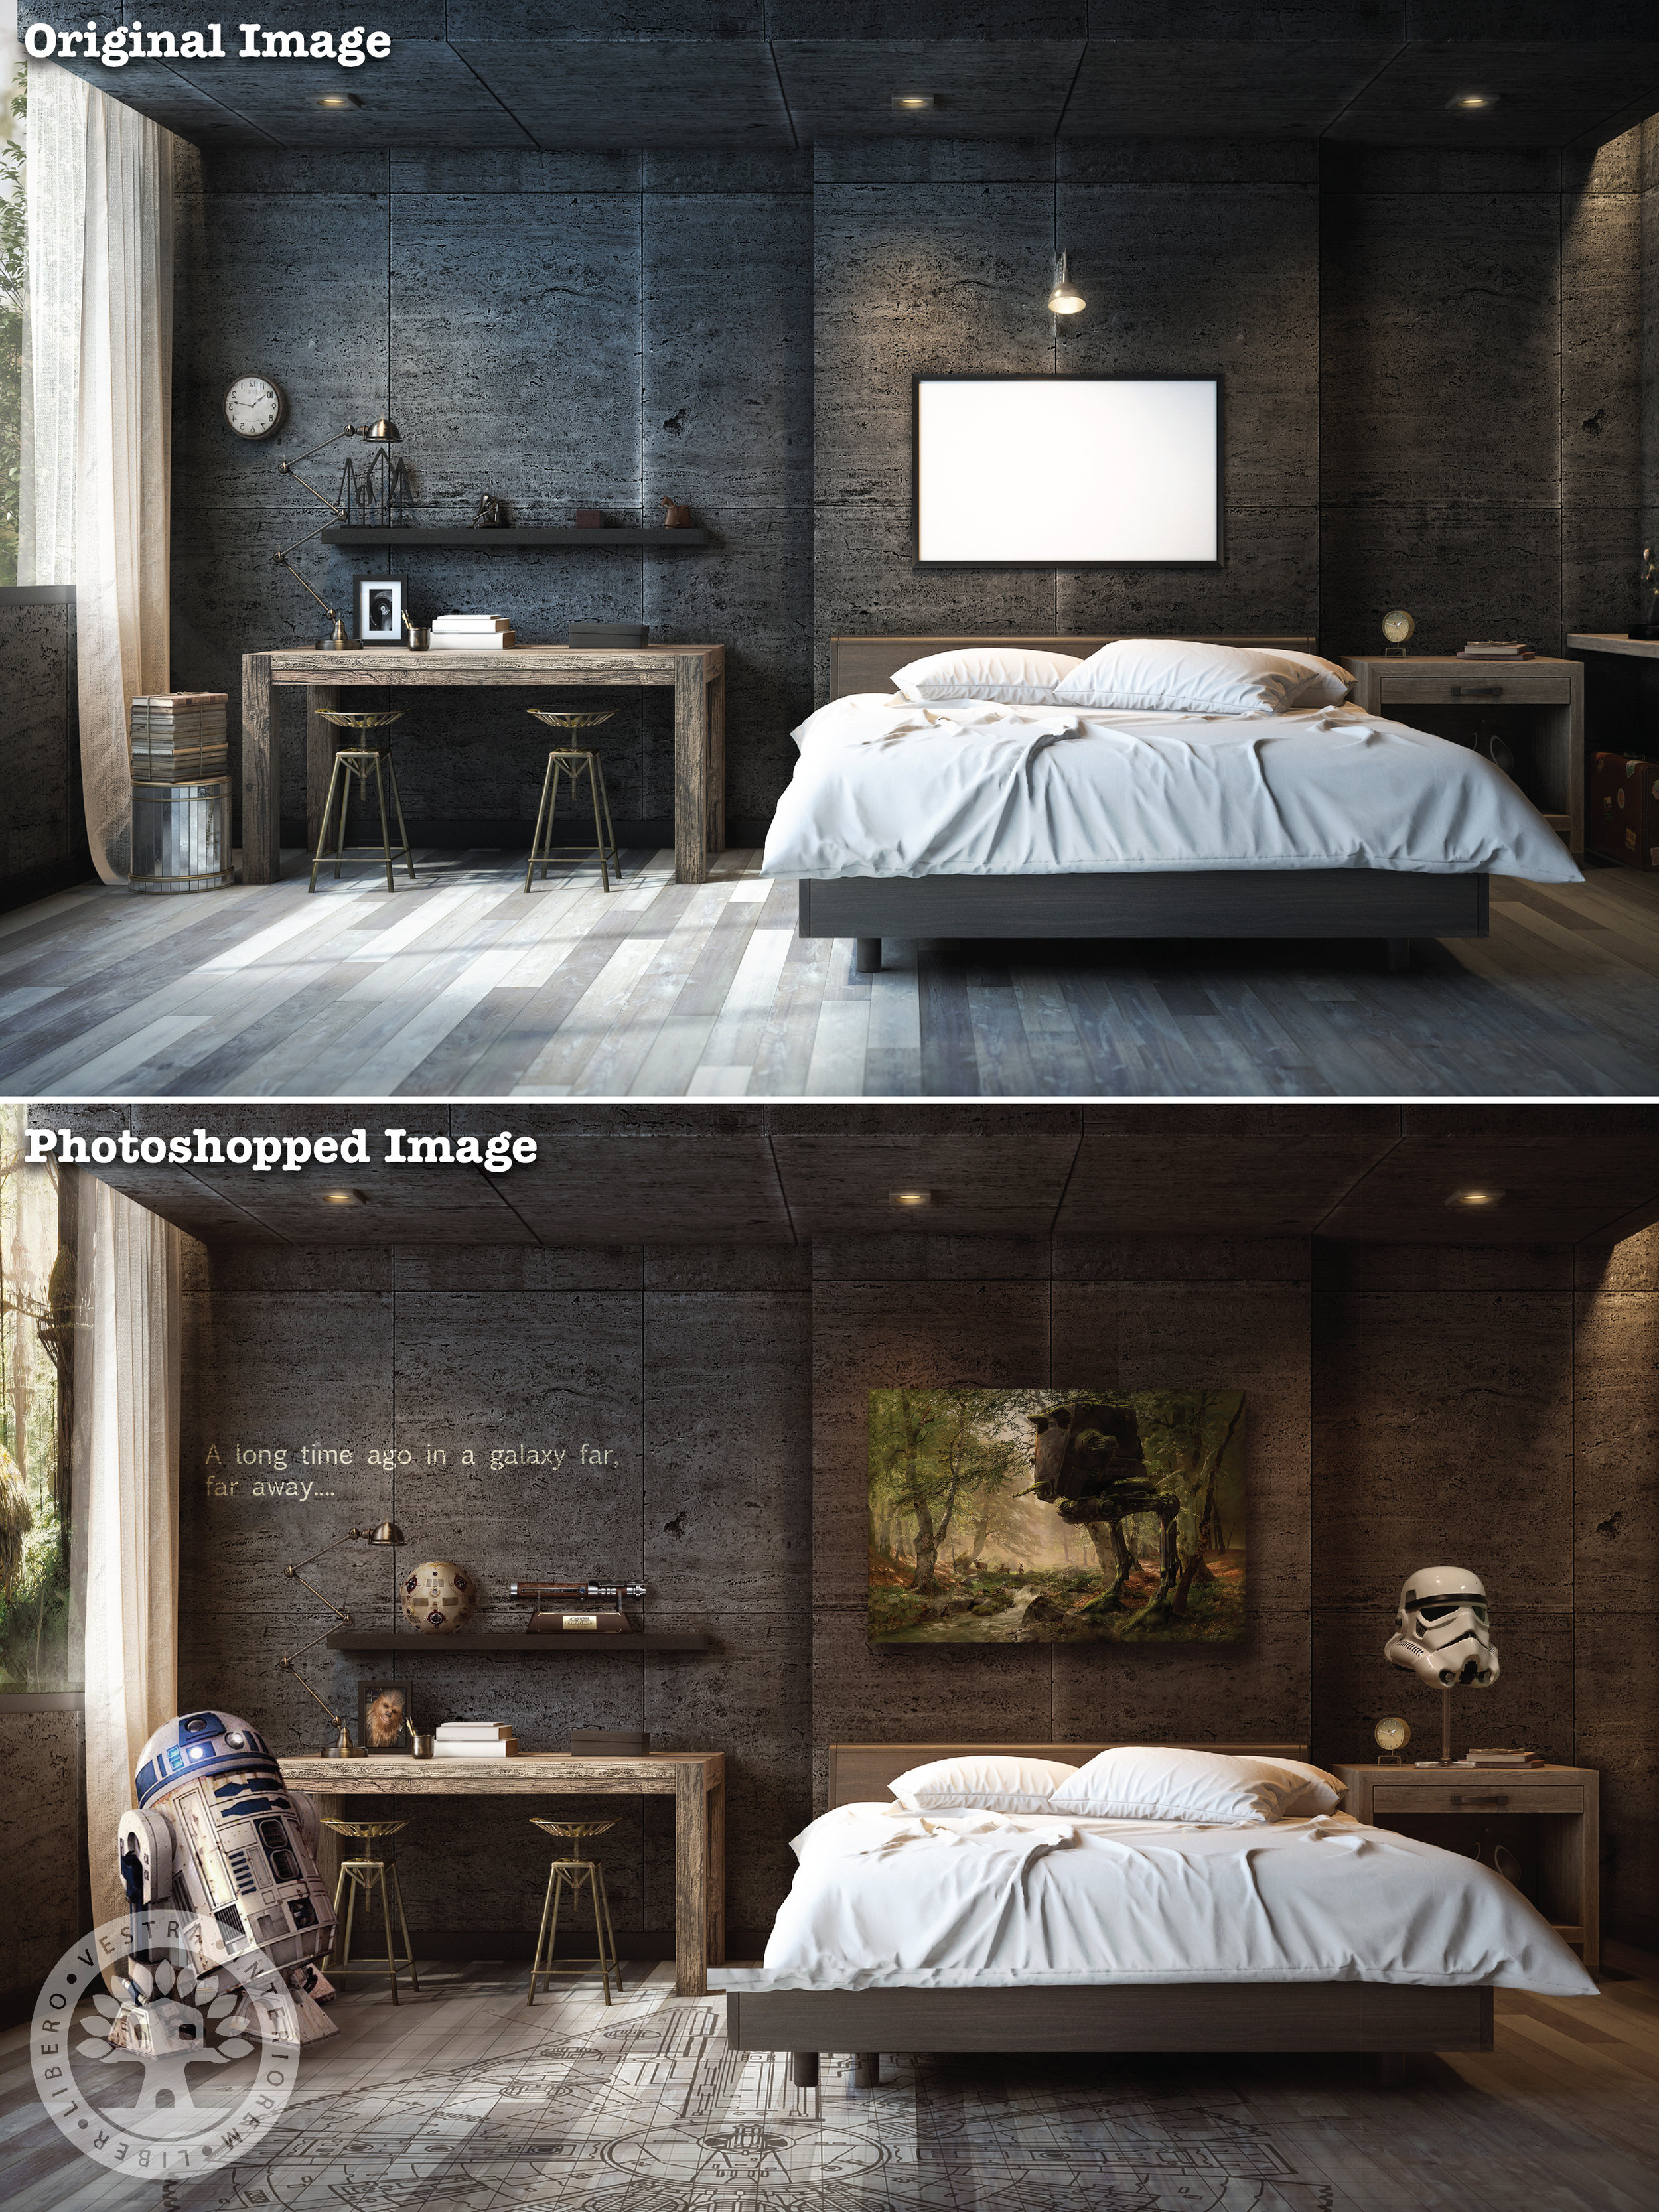 "Skywalker Loft" before and after Photoshop . ~ Corinne Jade, ClubHouse Collective